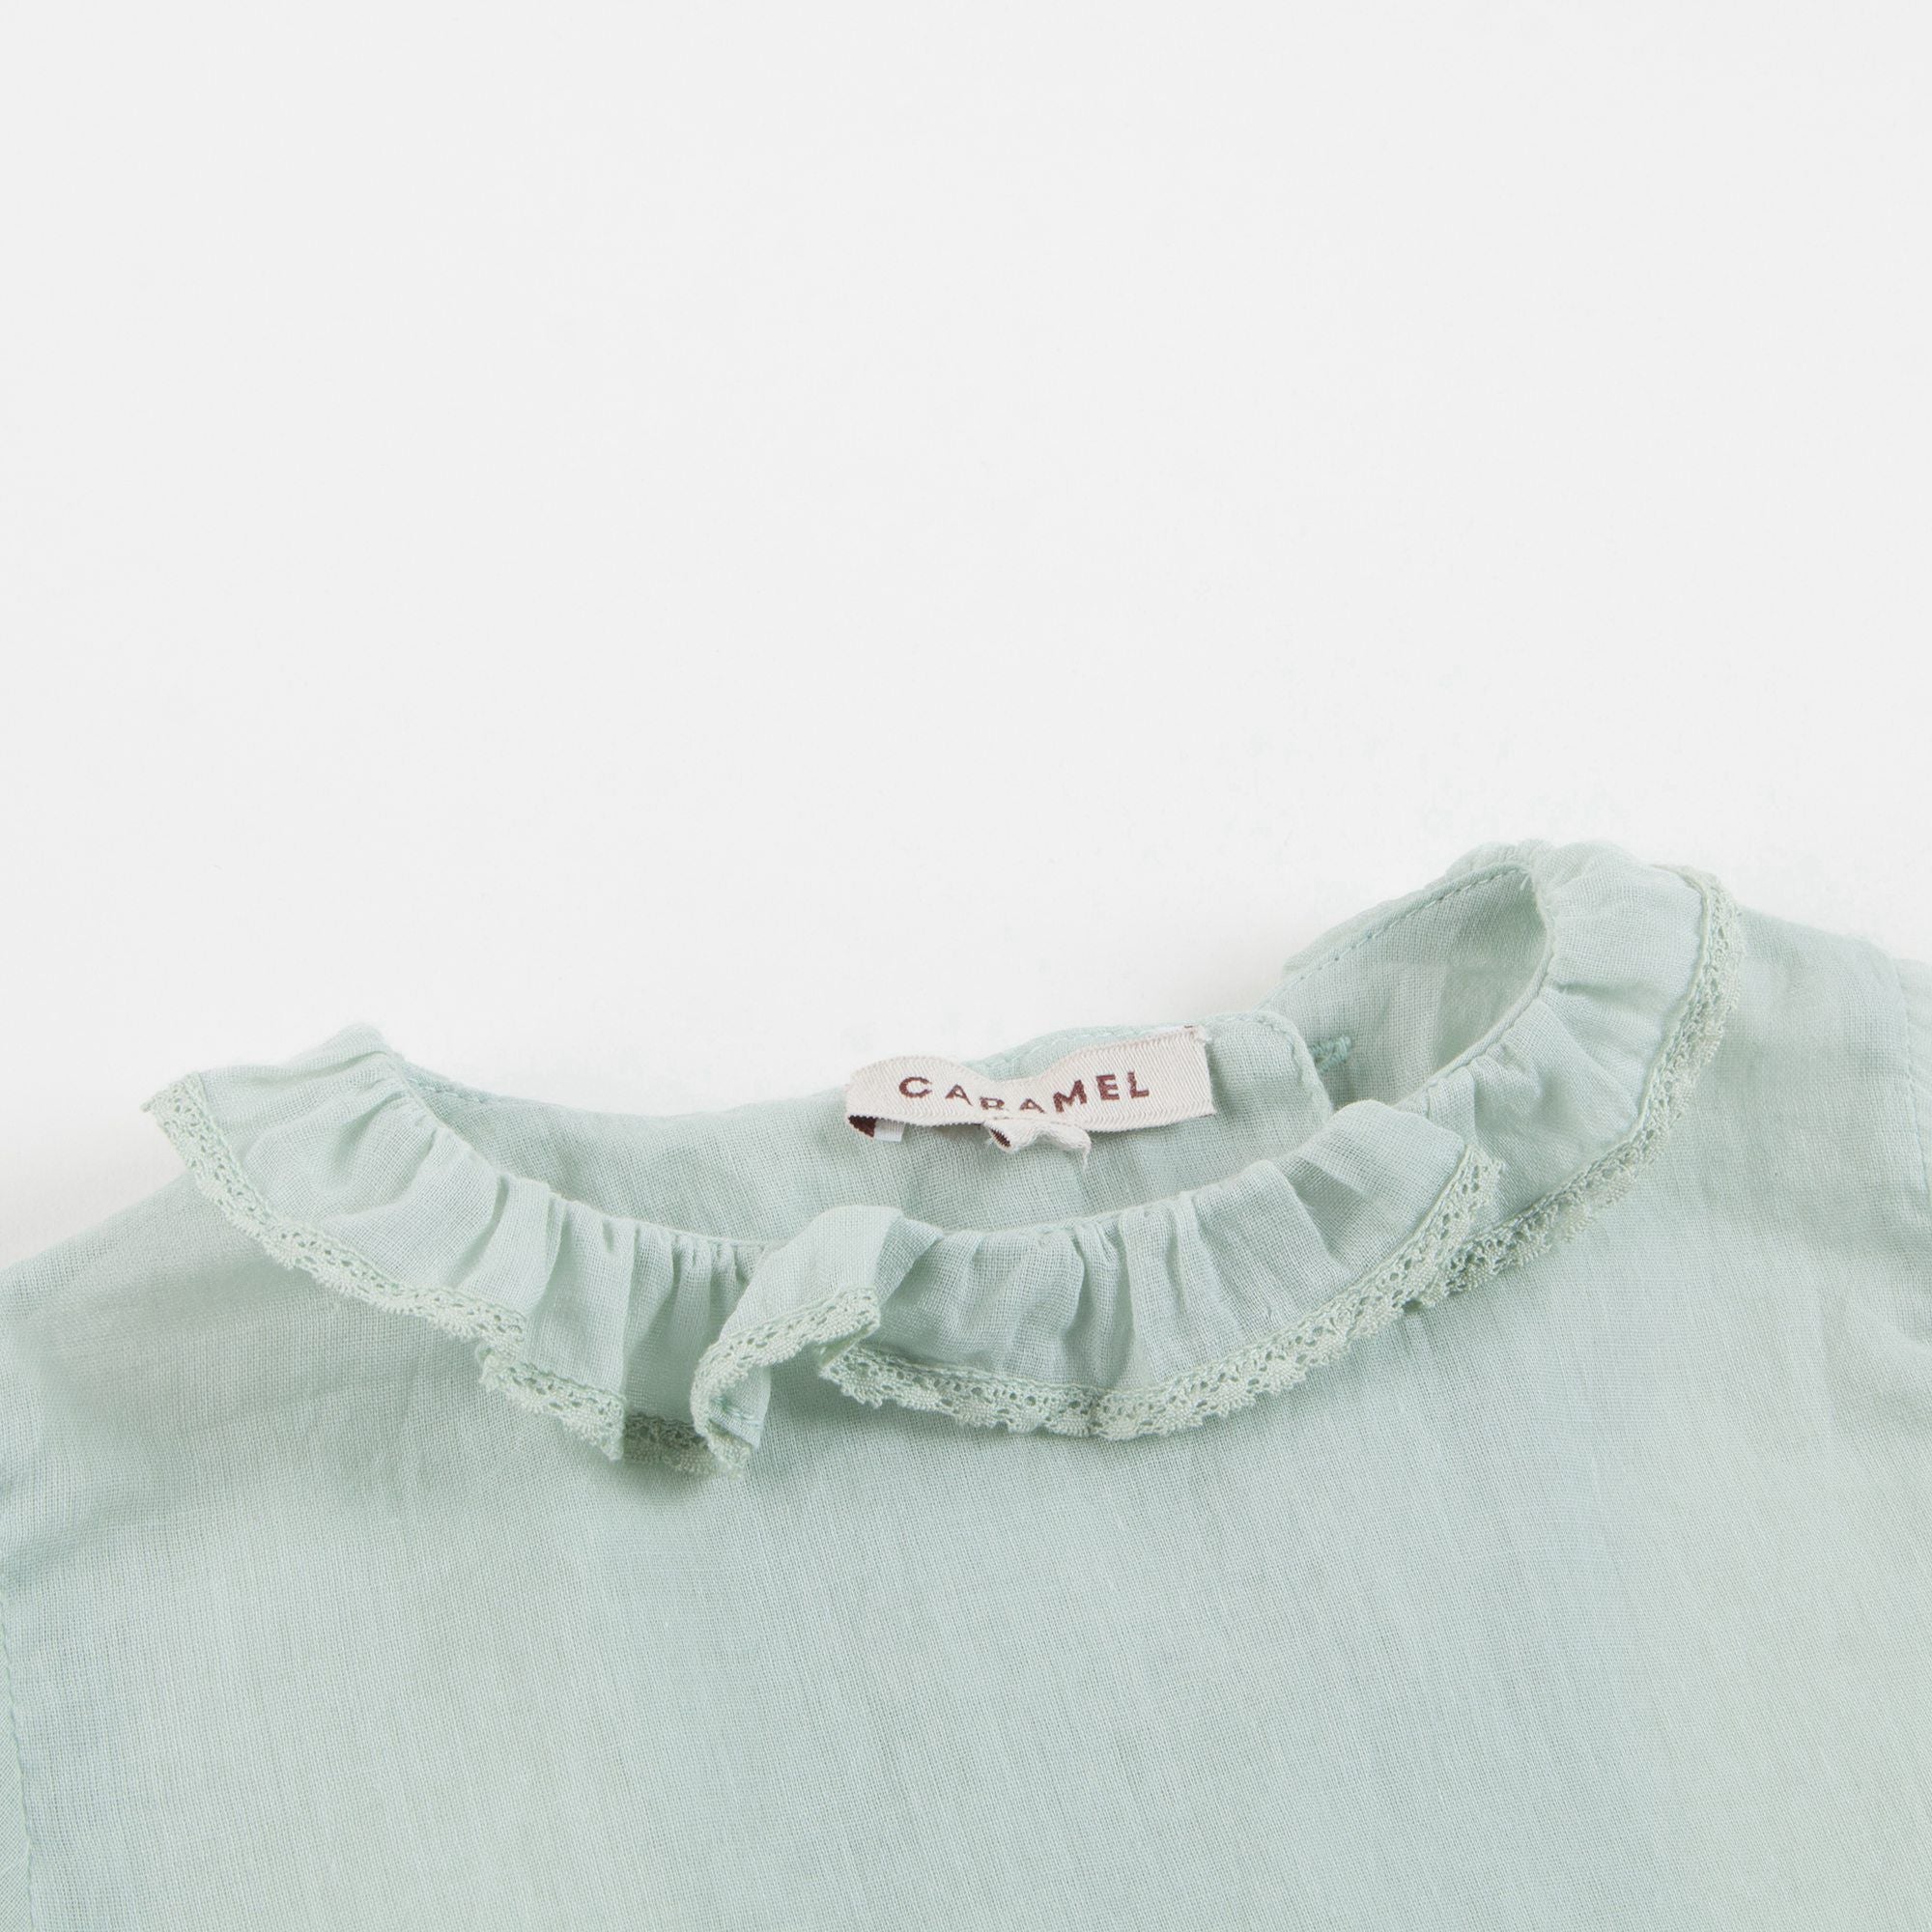 Baby Girls Pale Green Woven Top